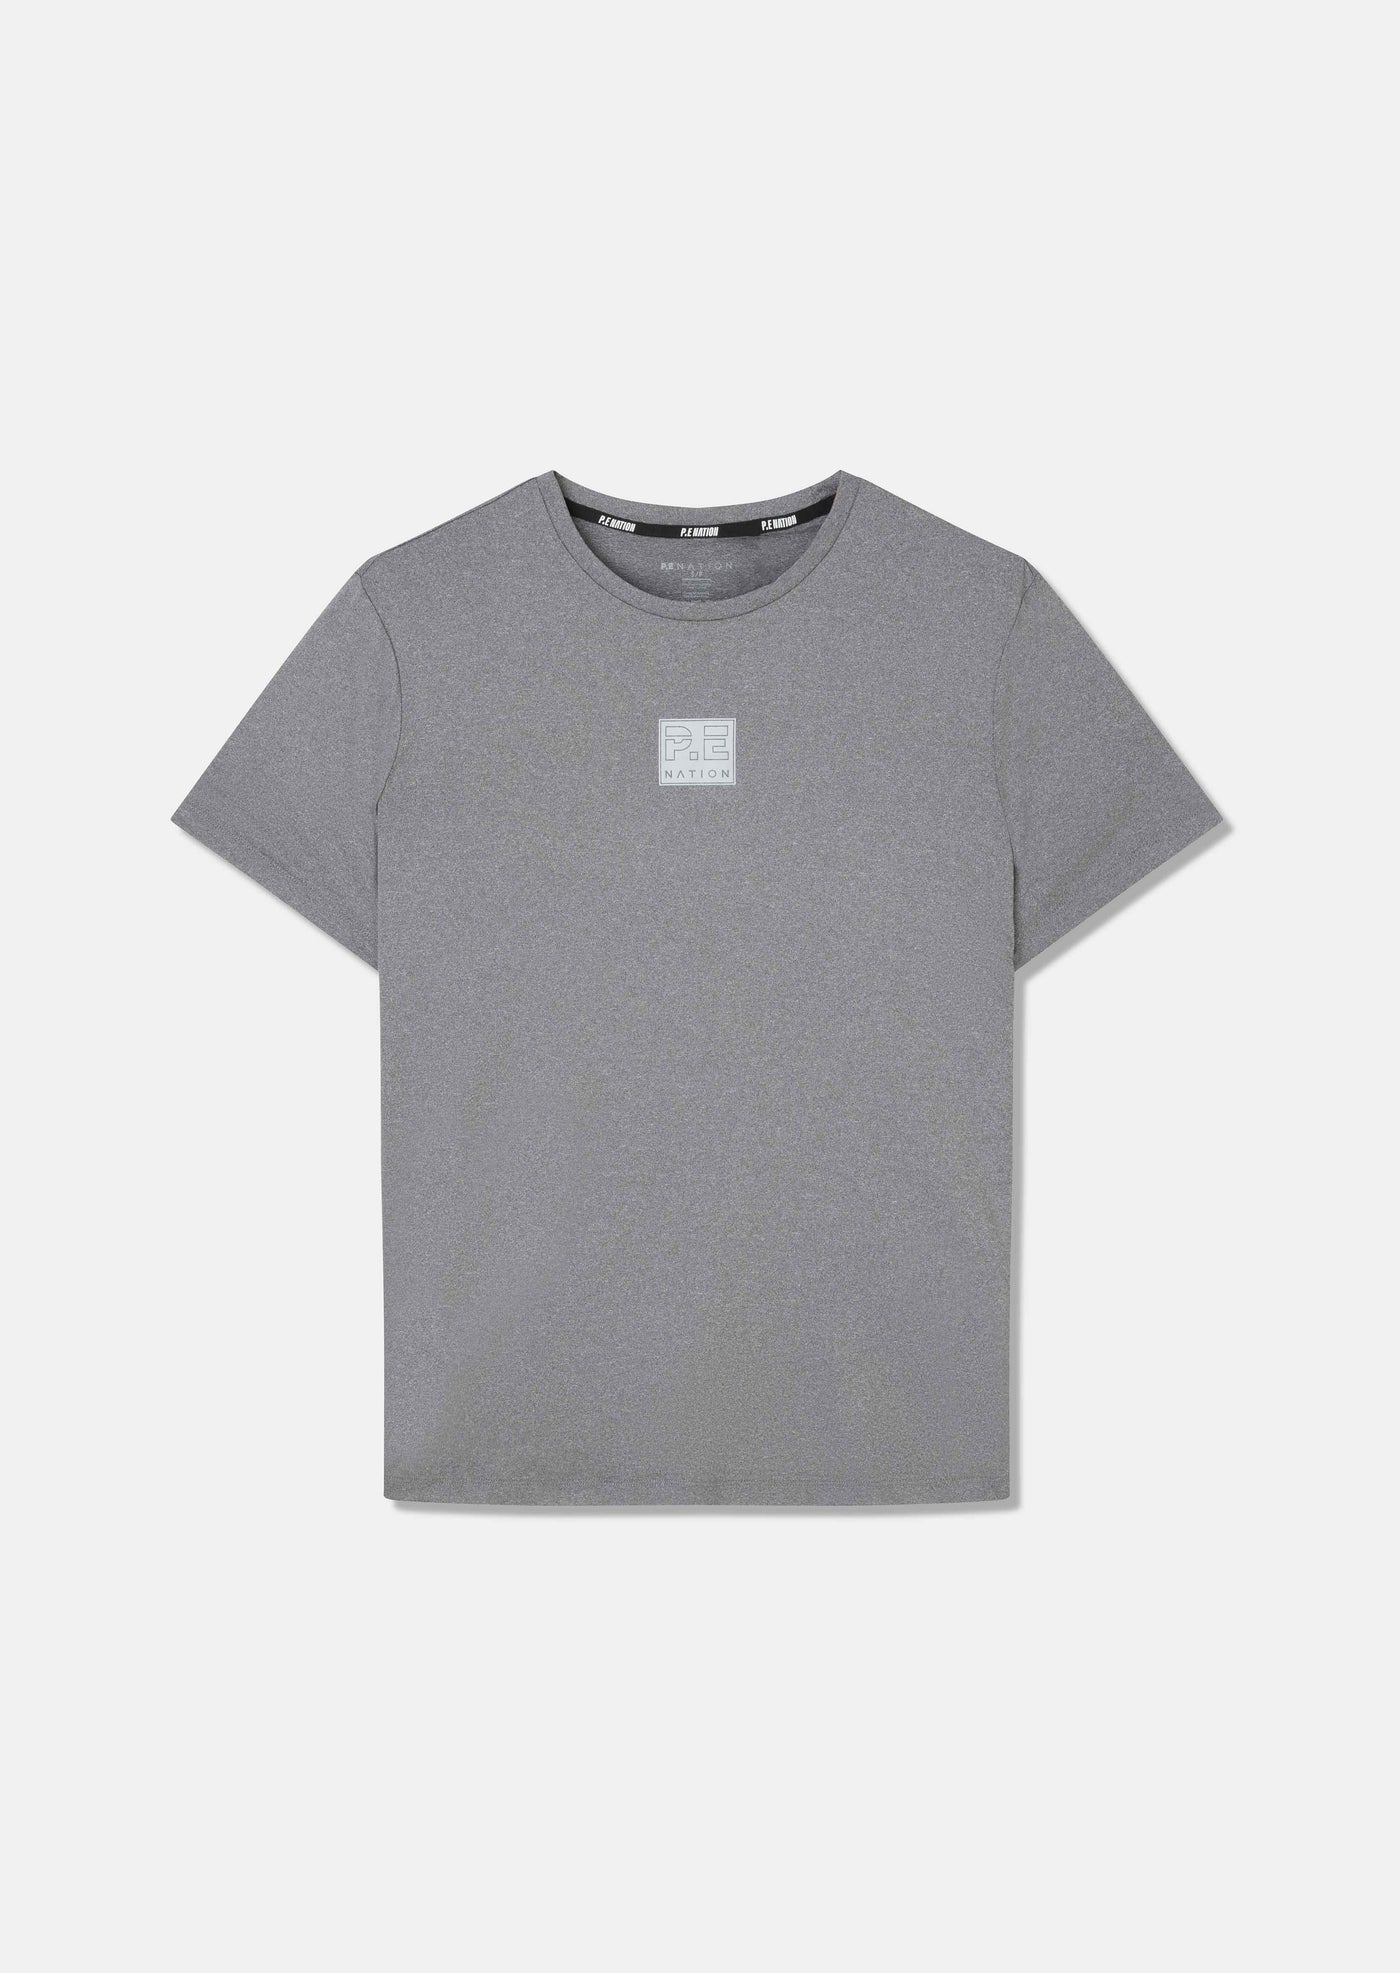 CROSSOVER MARLE AIR FORM TEE IN GREY MARLE